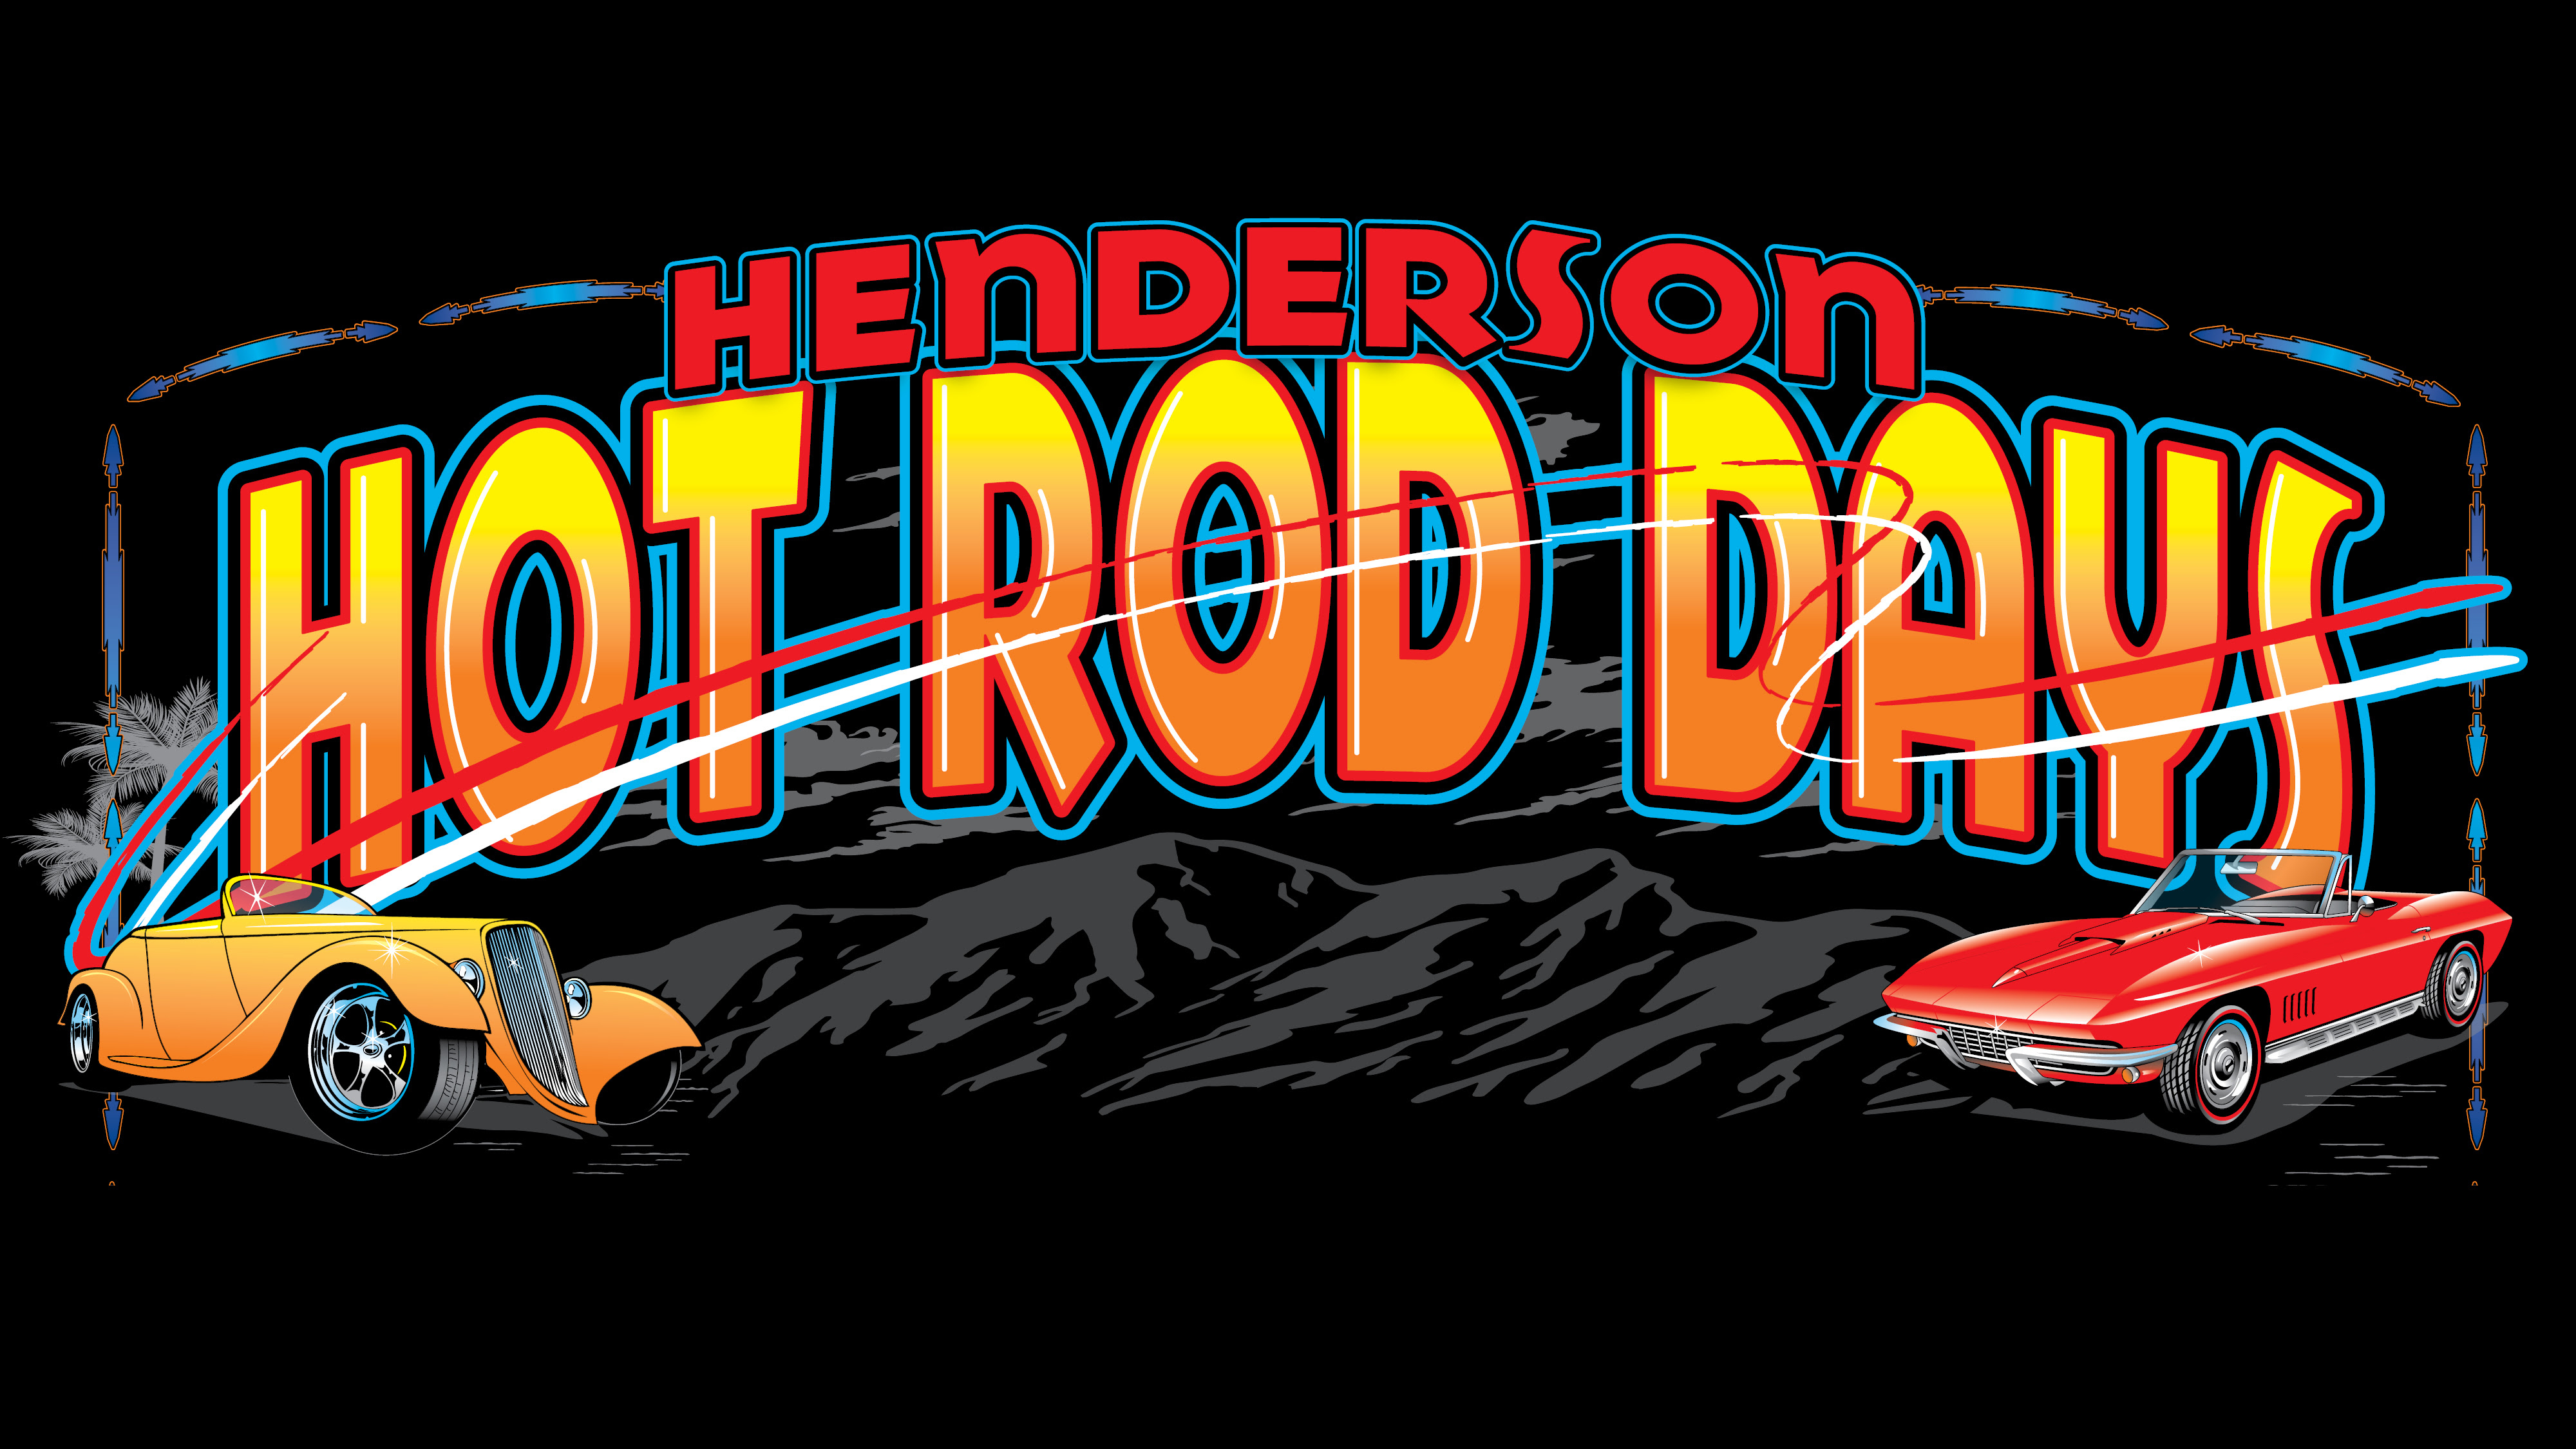 Henderson Nevada Happenings for October 2019 The Dulcie Crawford Group